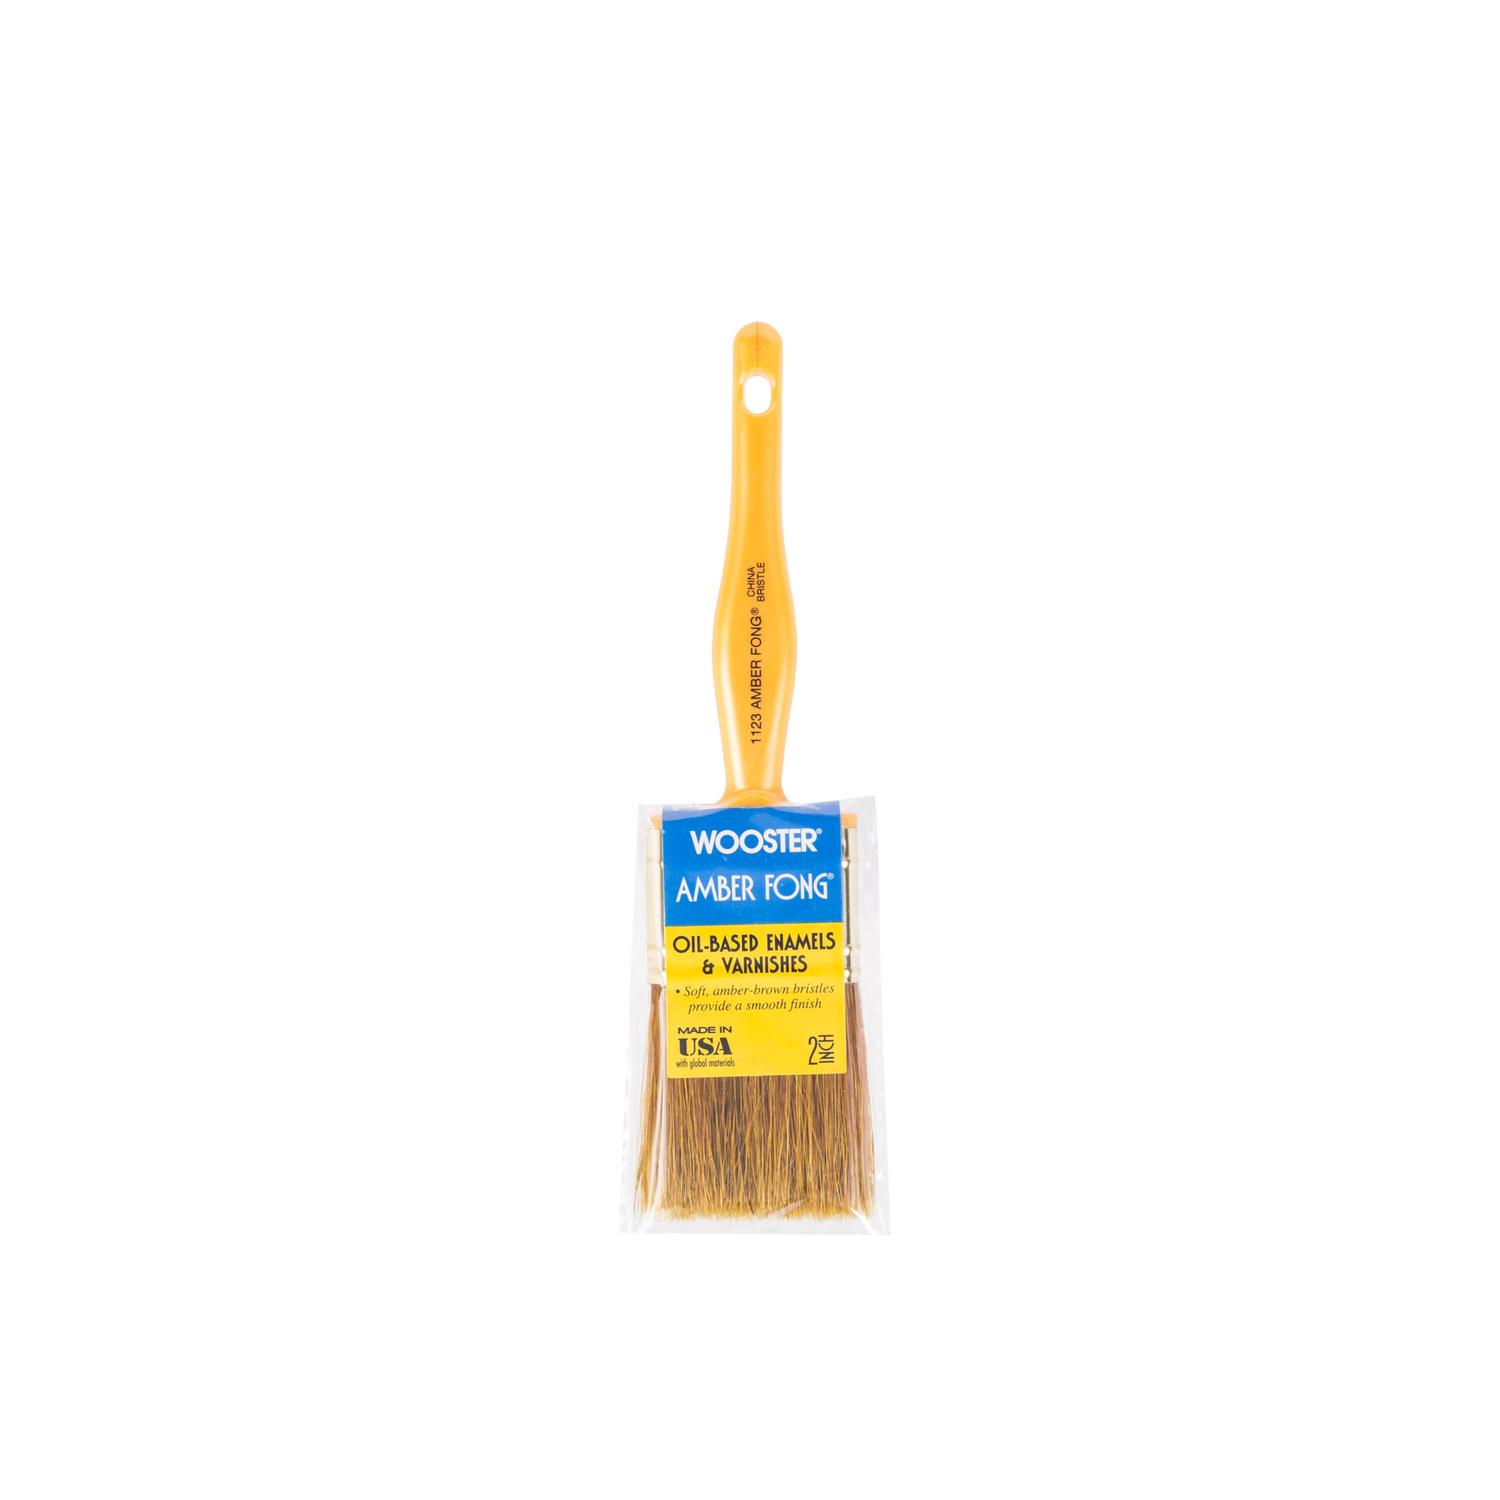 Photos - Putty Knife / Painting Tool Wooster Amber Fong 2 in. Flat Paint Brush 1123-2